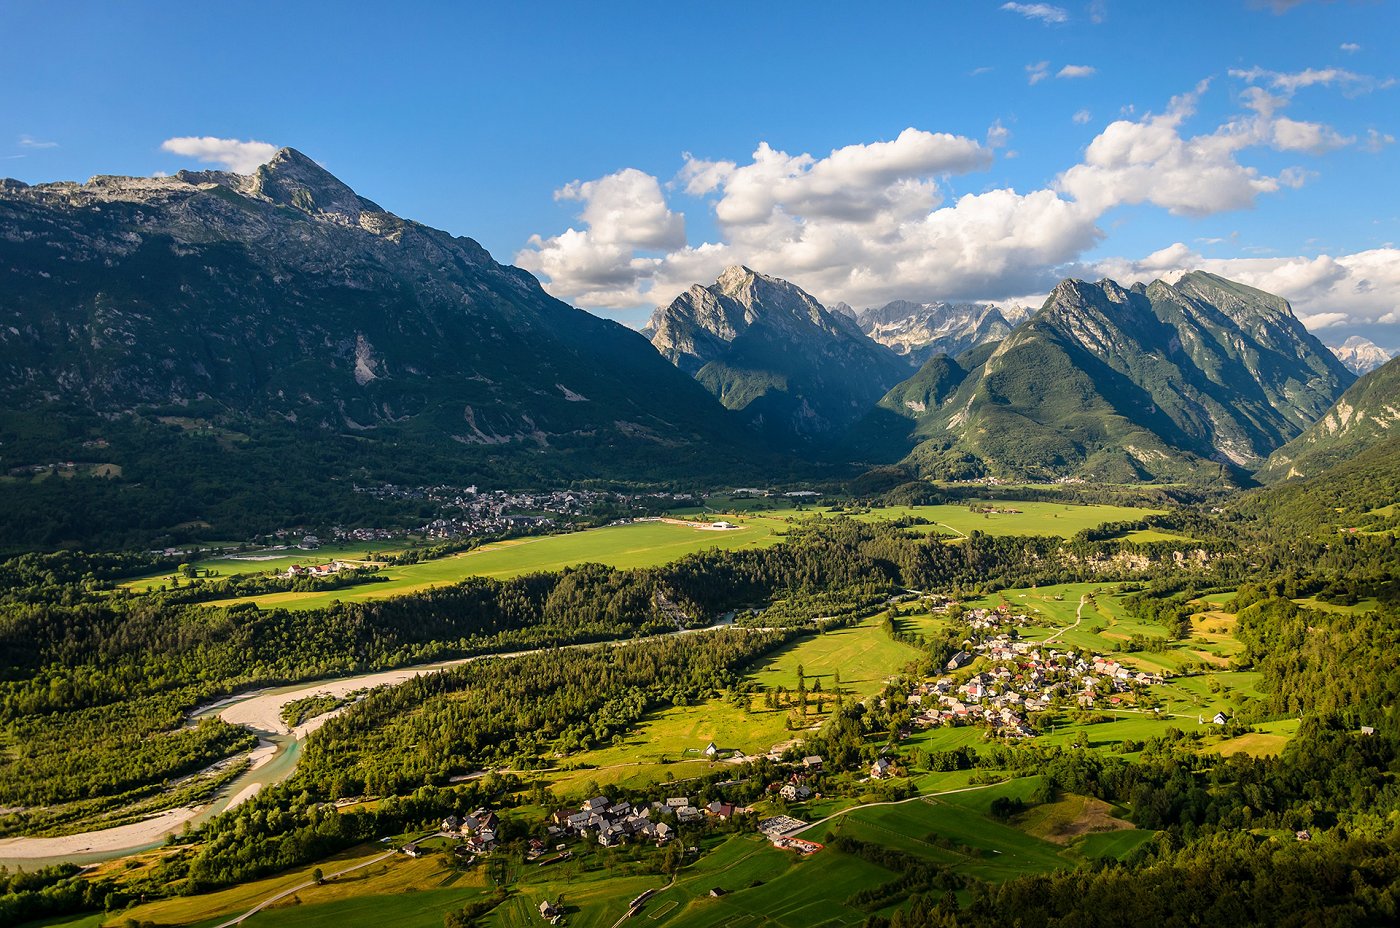 View of the town of Bovec and the village of Čezsoča, between which the river Soča flows, in the background the local mountains